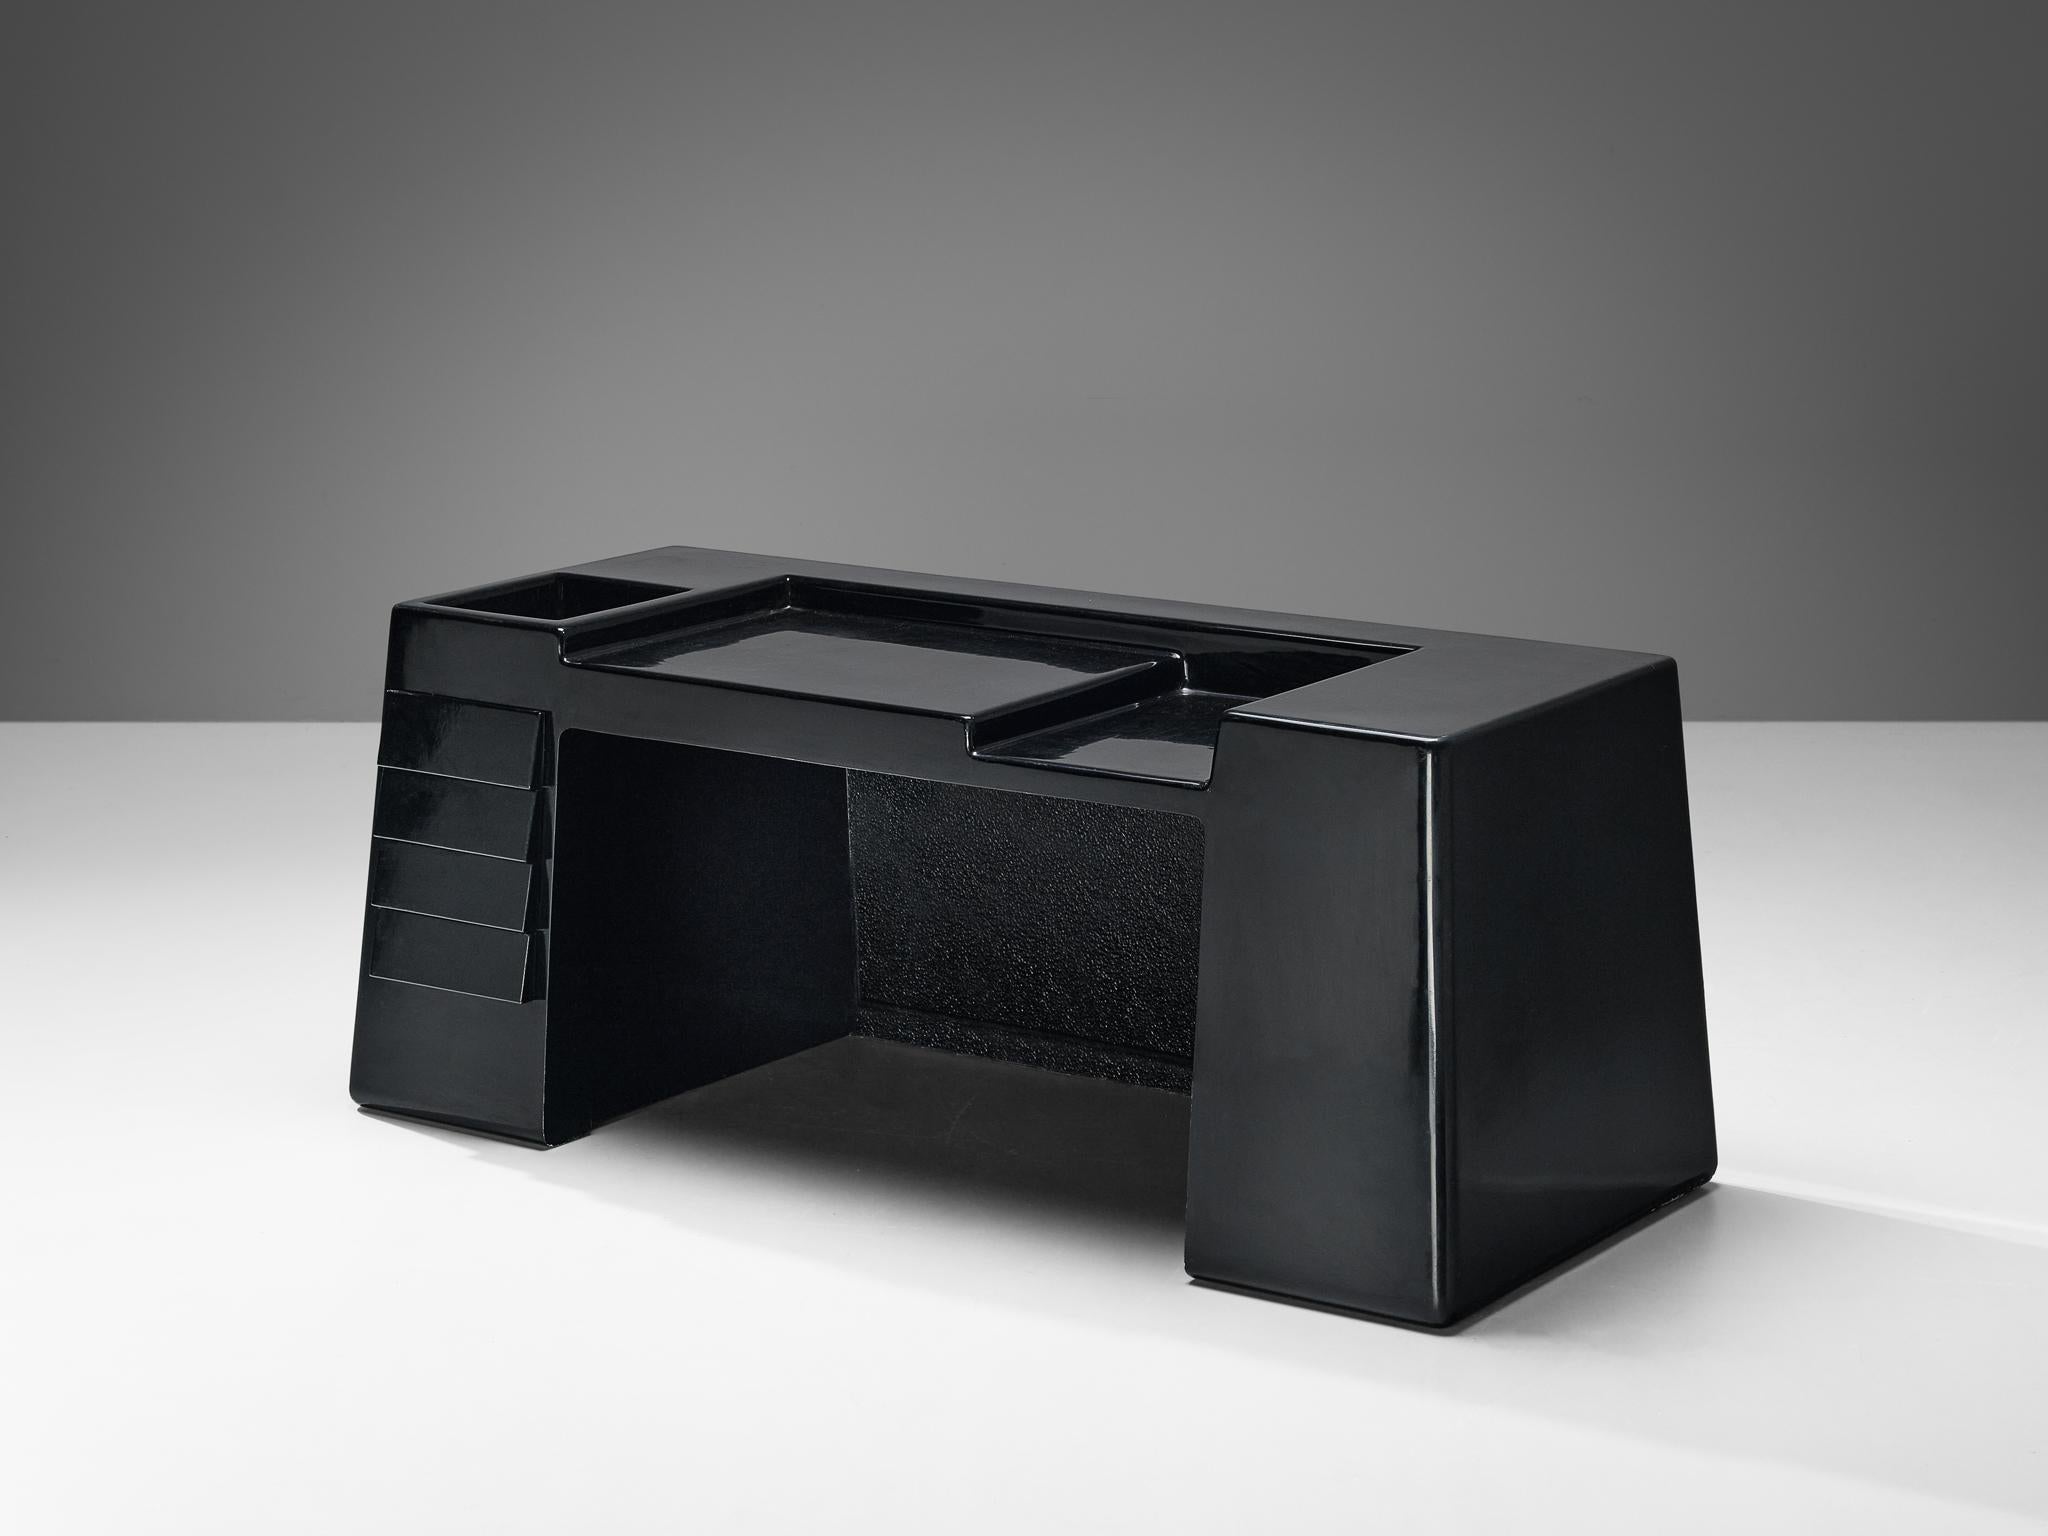 Vittorio Introini for Saporiti, free-standing desk, fiberglass, Italy, 1969

This admirable free-standing desk was designed by the Italian designer Vittorio Introini. Due to its all-black design and the distinct shapes, this desk has a strong